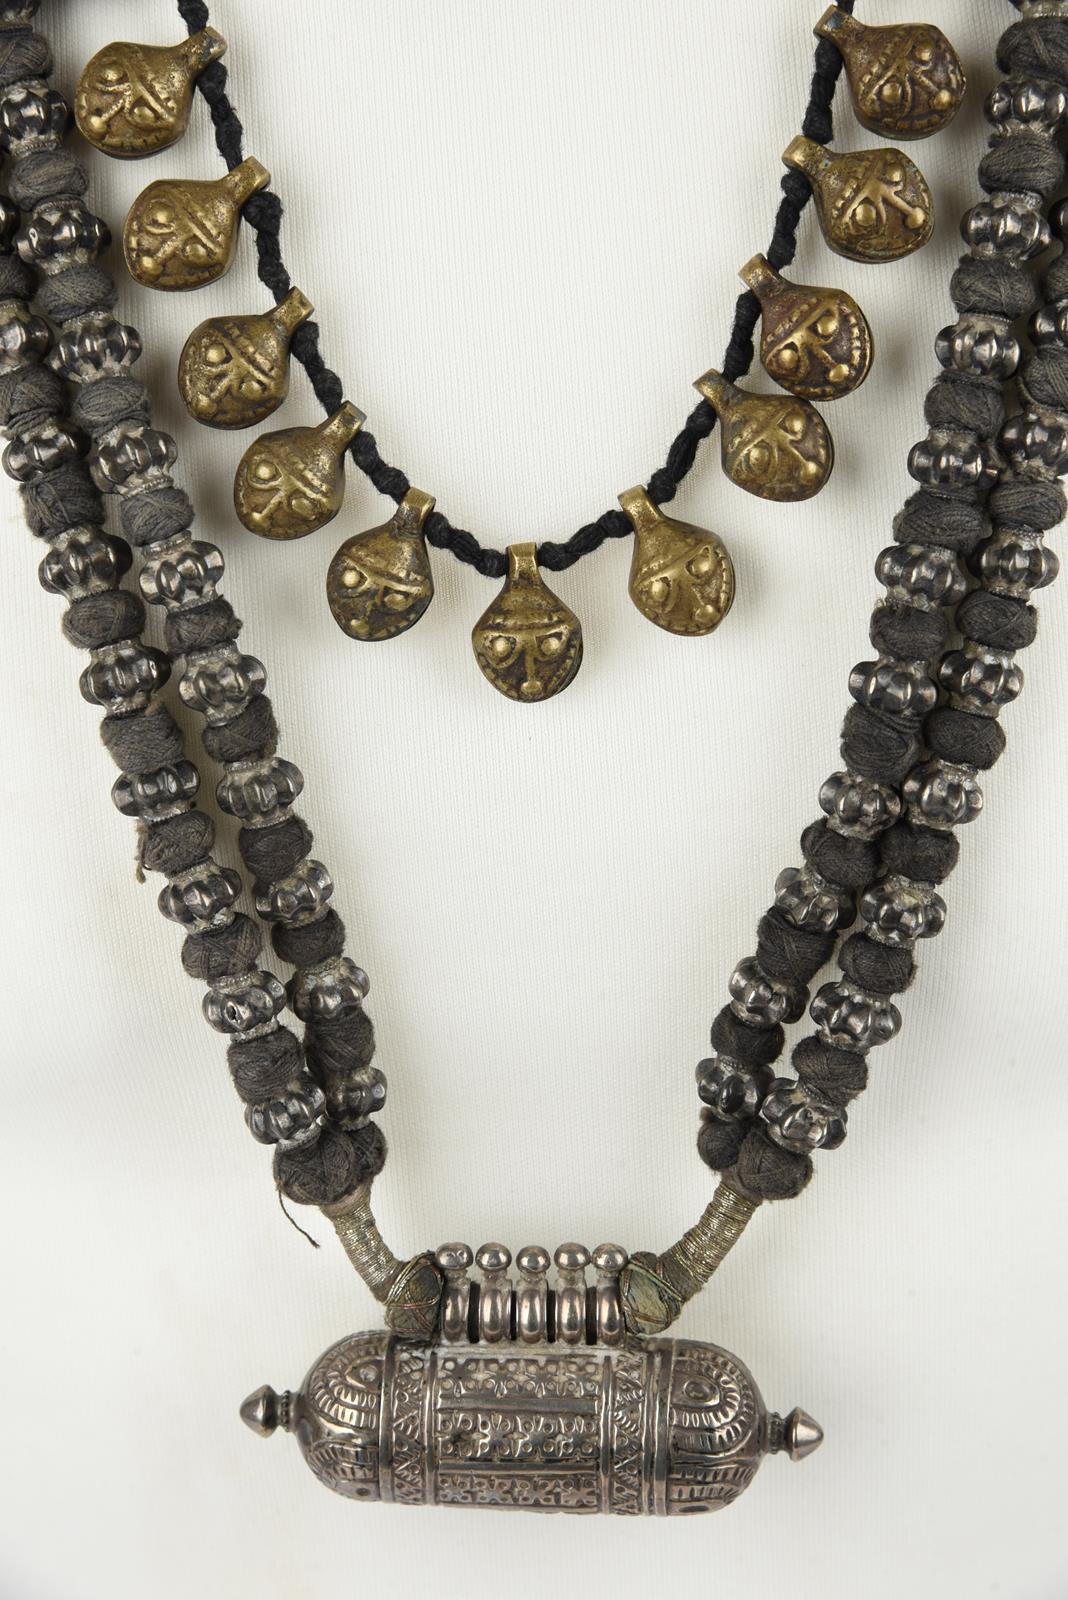 Five Nepal metal mounted necklaces including one with an amulet box and a double strand with cog - Image 4 of 17